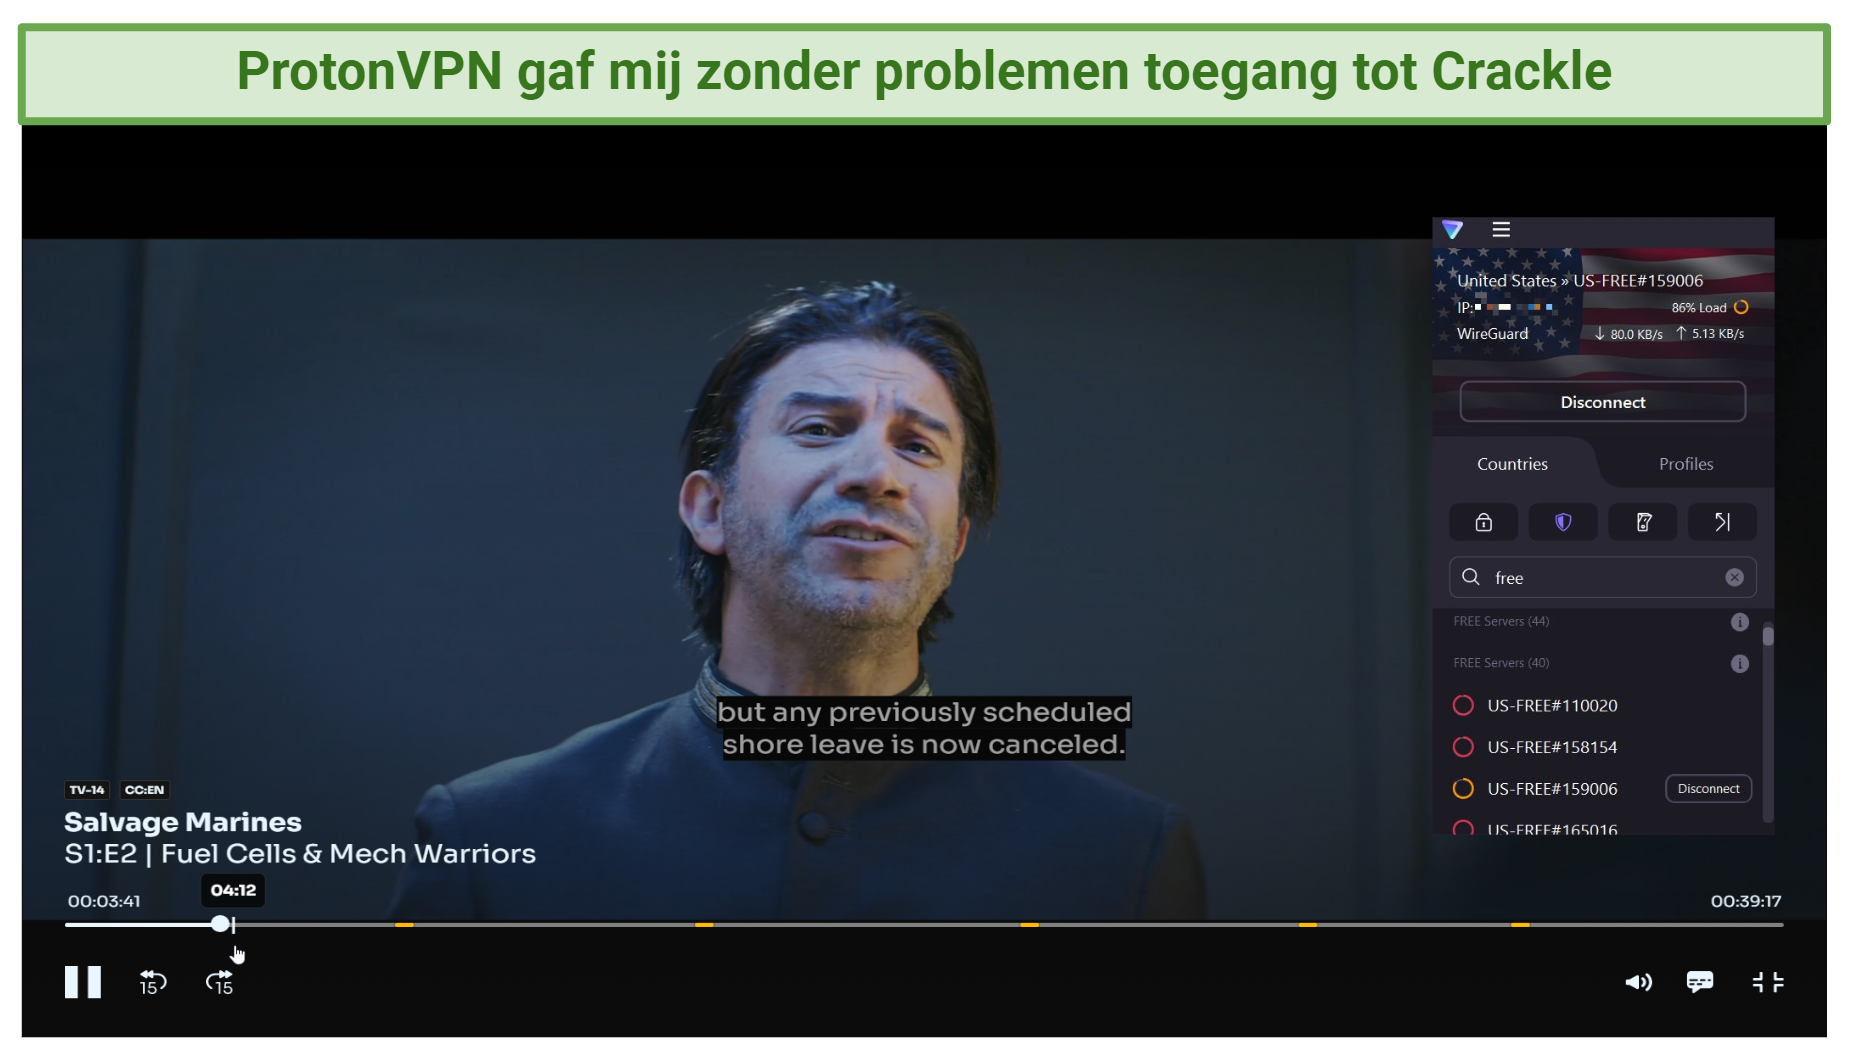 screenshot showing Salvage Marines streaming on Crackle with ProtonVPN connected